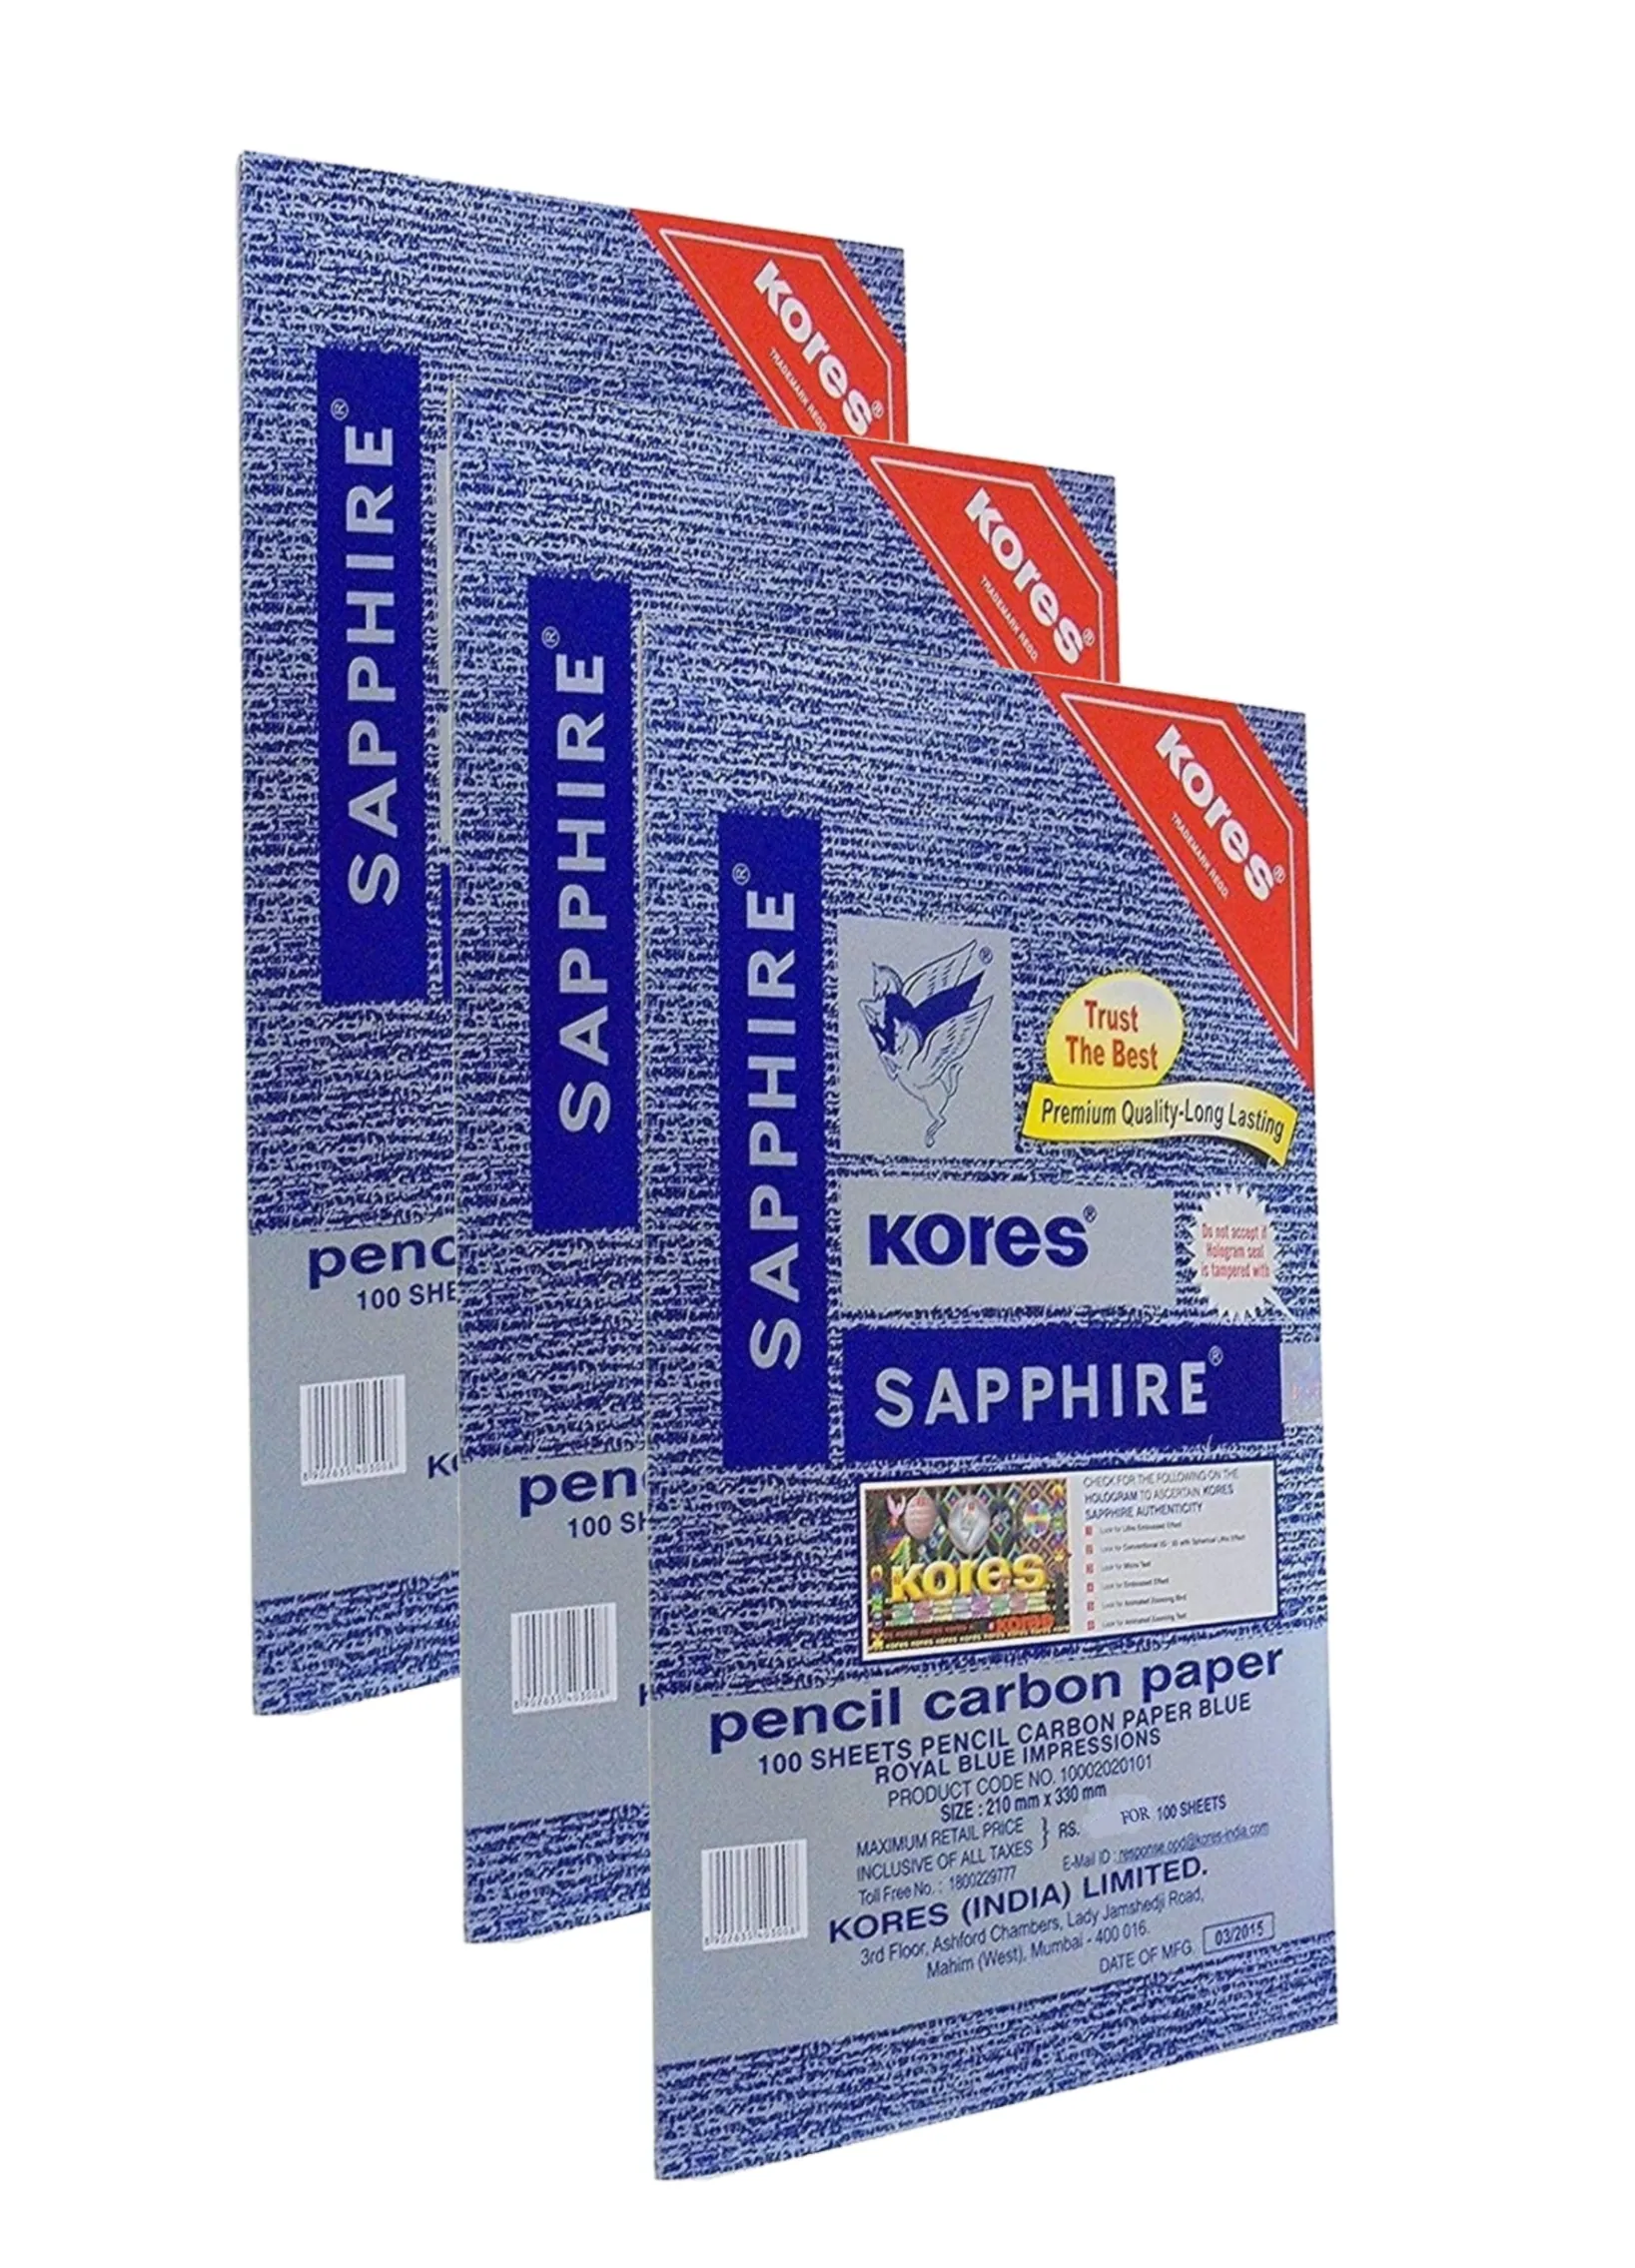 Kores Sapphire Pencil Carbon Paper, Royal Blue 100 Sheet inside Pack, (Pack of 3)